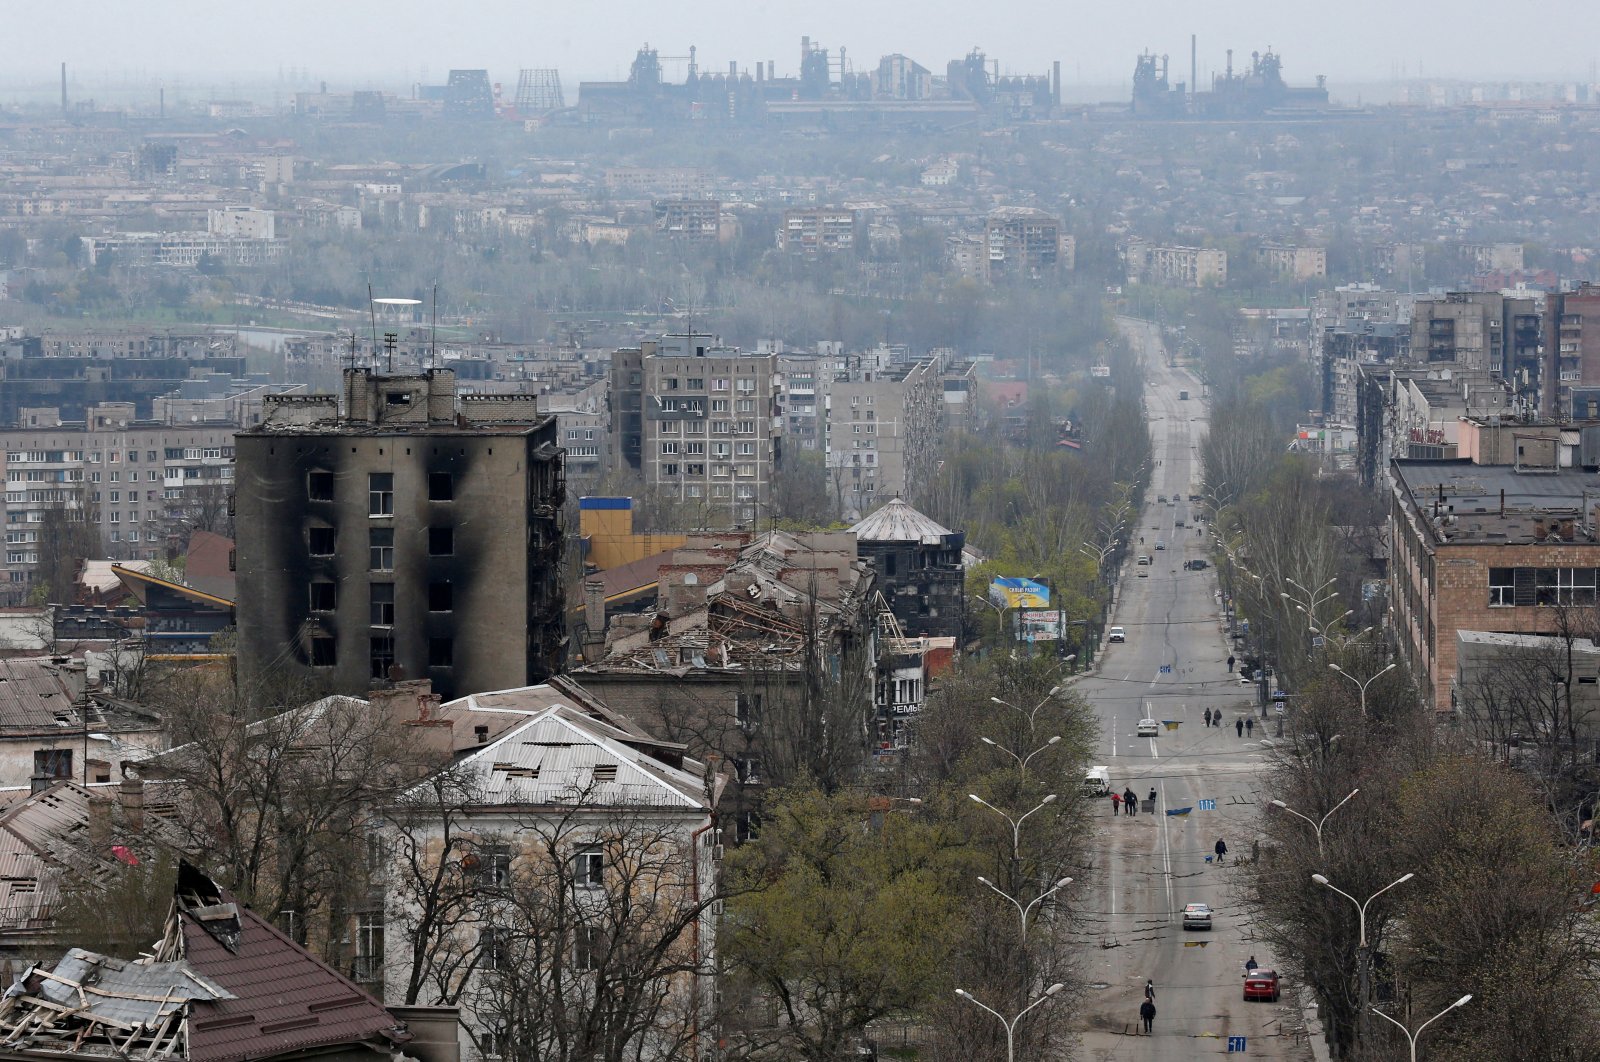 FILE PHOTO: A view shows damaged buildings, with the Azovstal Iron and Steel Works plant in the background, in the southern port city of Mariupol, Ukraine April 19, 2022. REUTERS/Alexander Ermochenko/File Photo